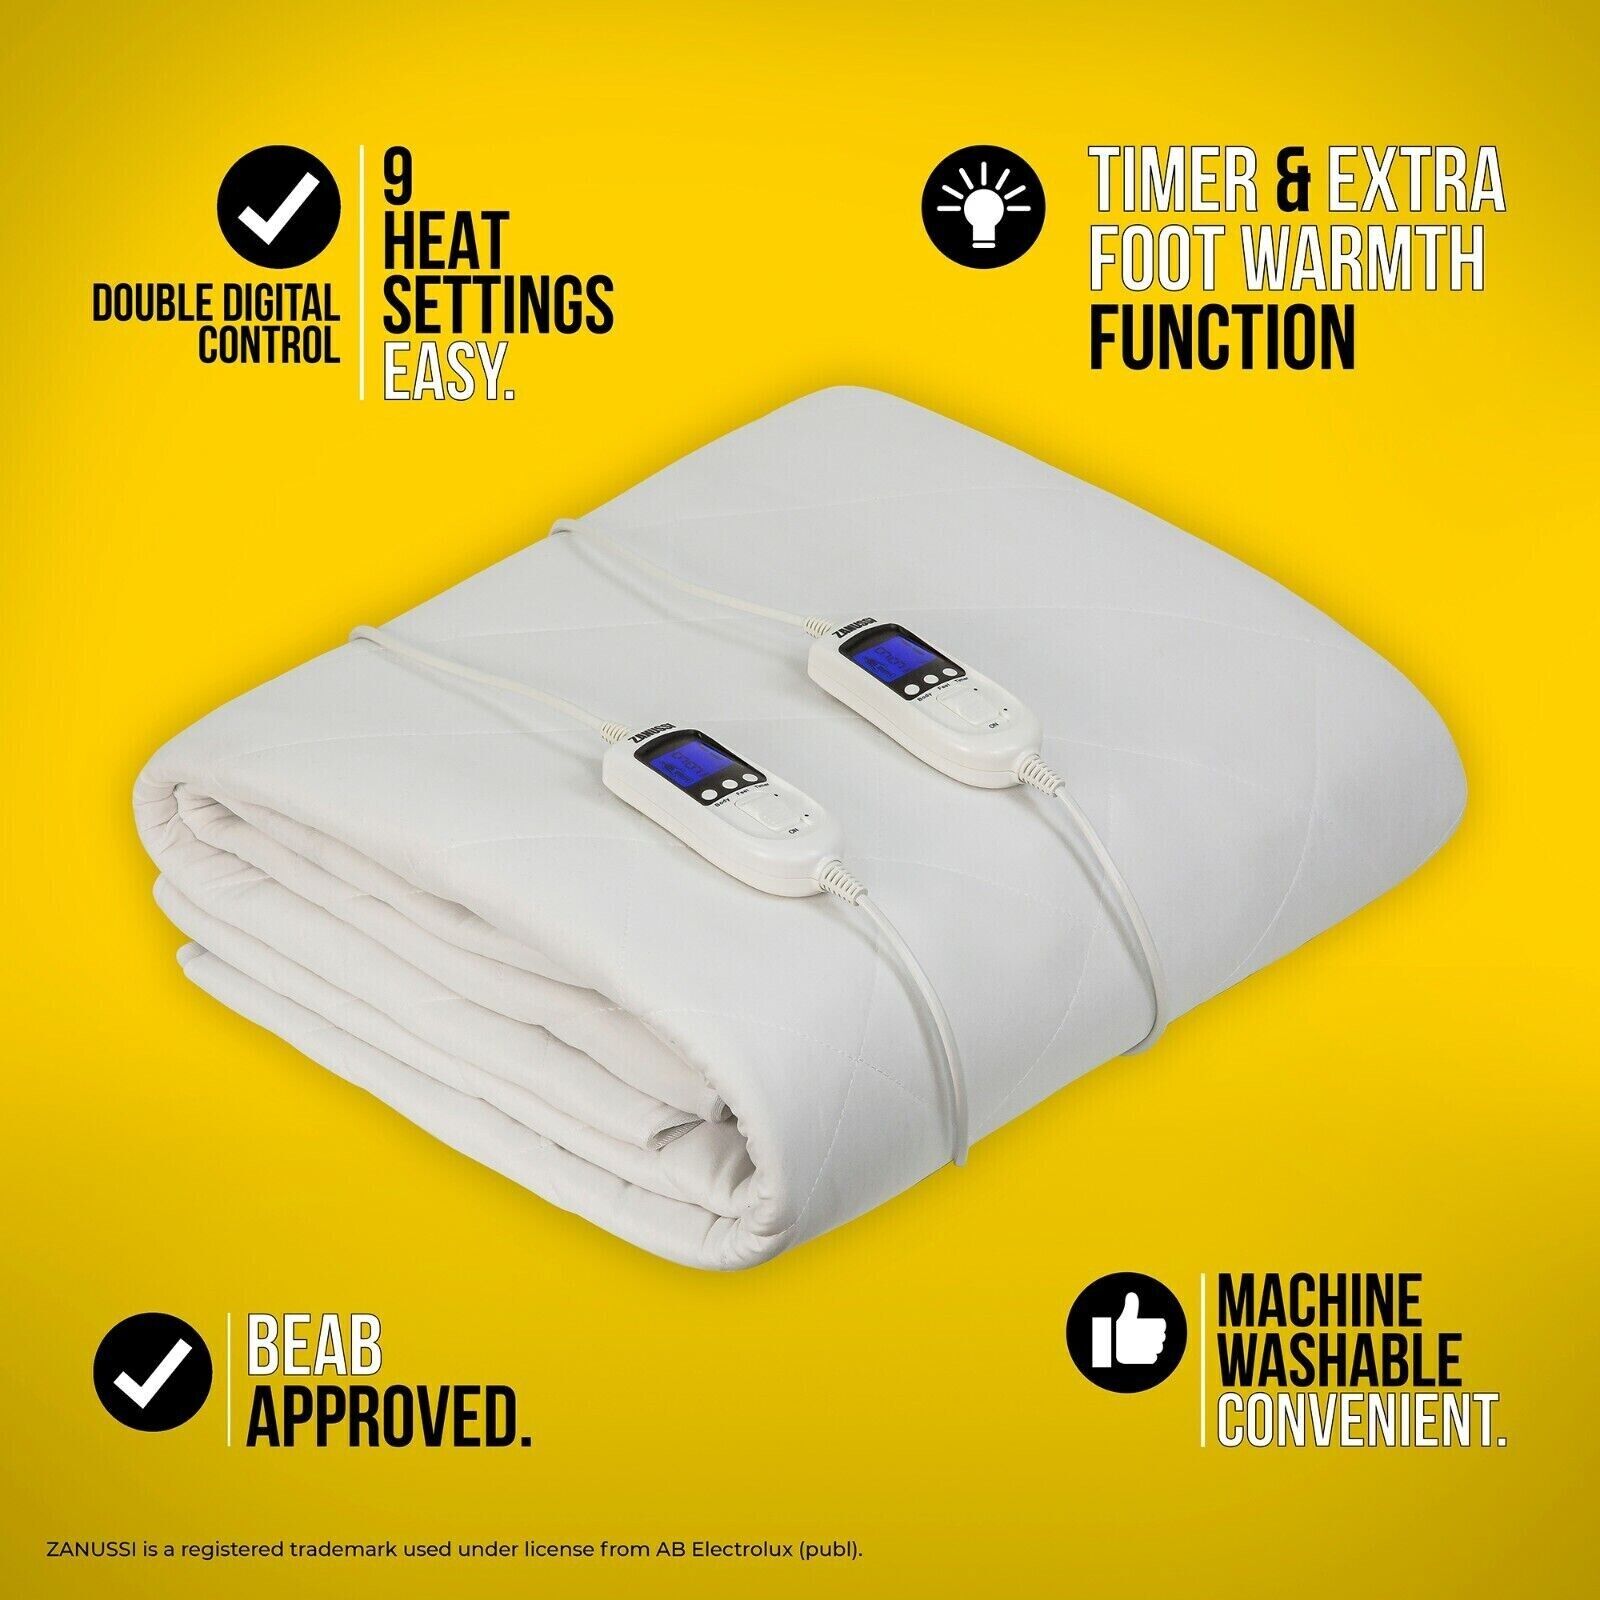 Zanussi Double Electric Heated Blanket with 9 Heat Settings and Timer - EX DEMO MODEL